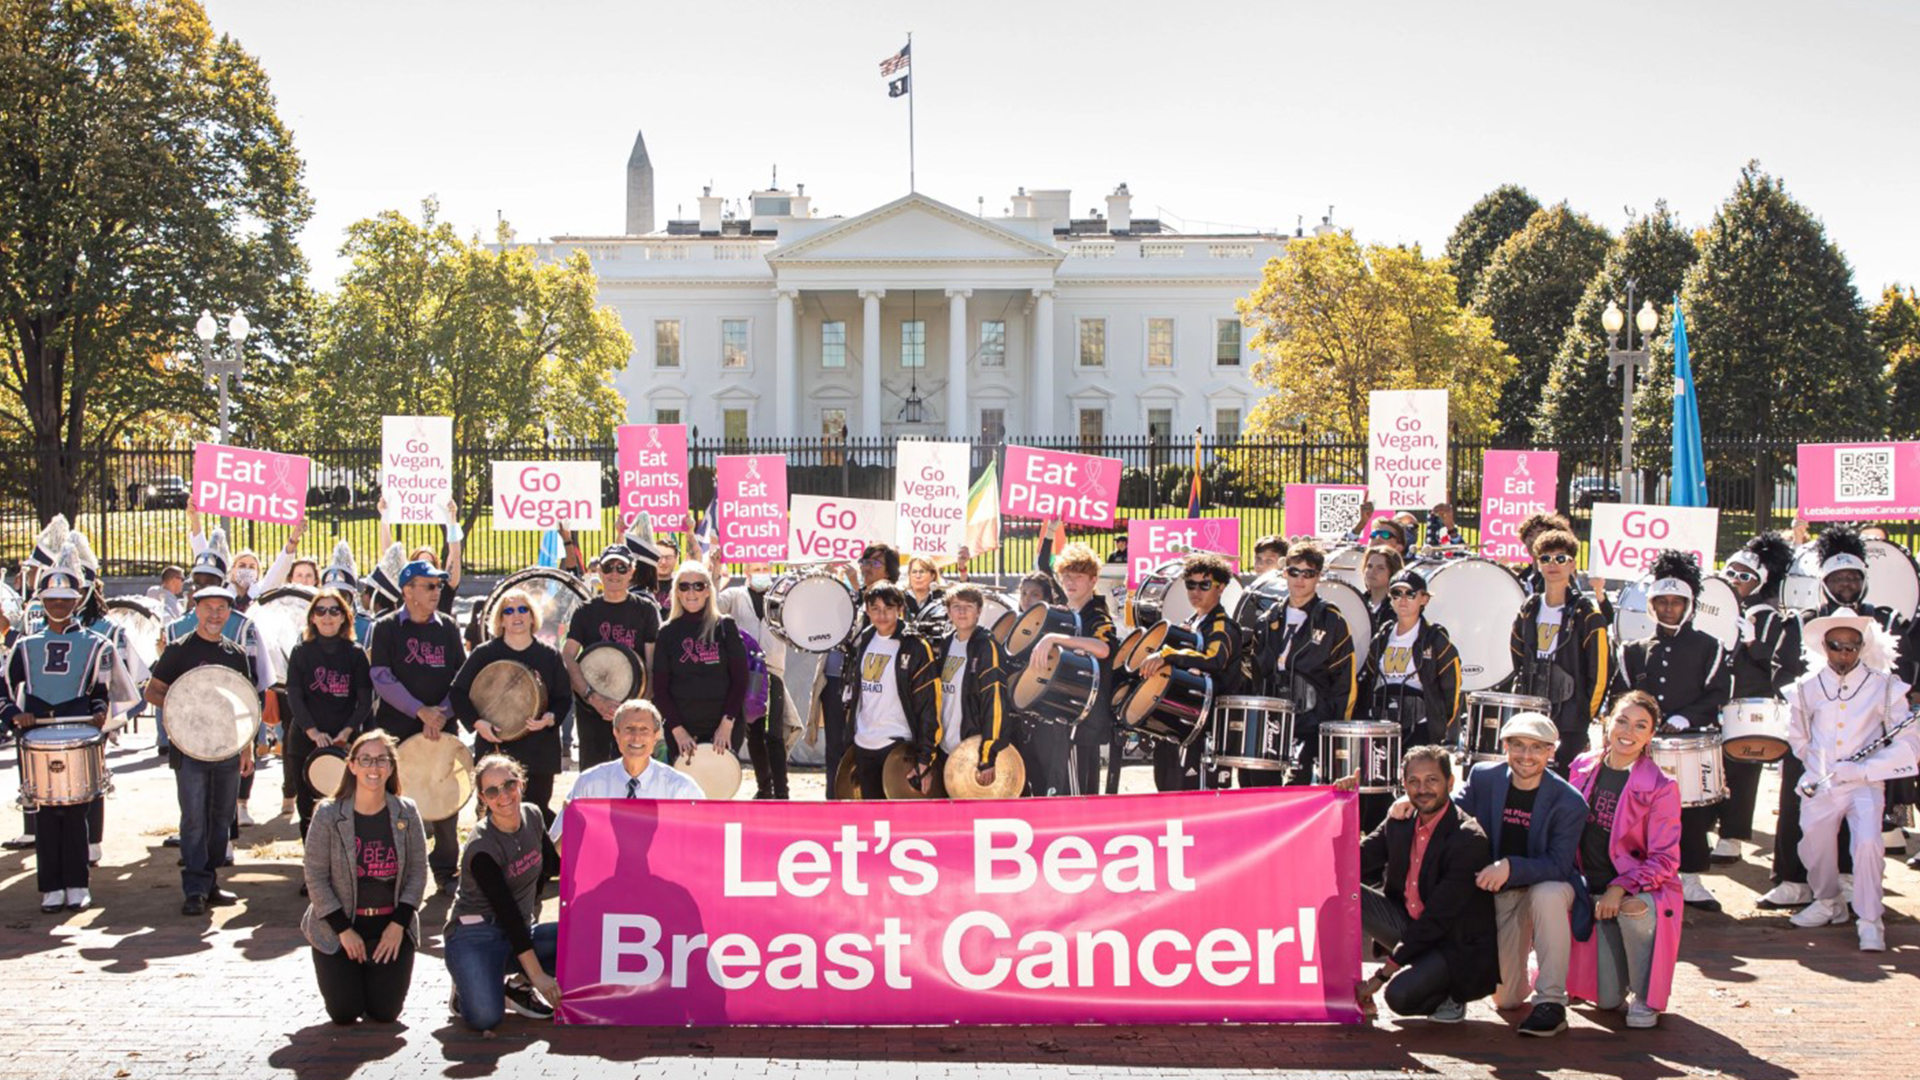 Let's Beat Breast Cancer White House Drum Rally